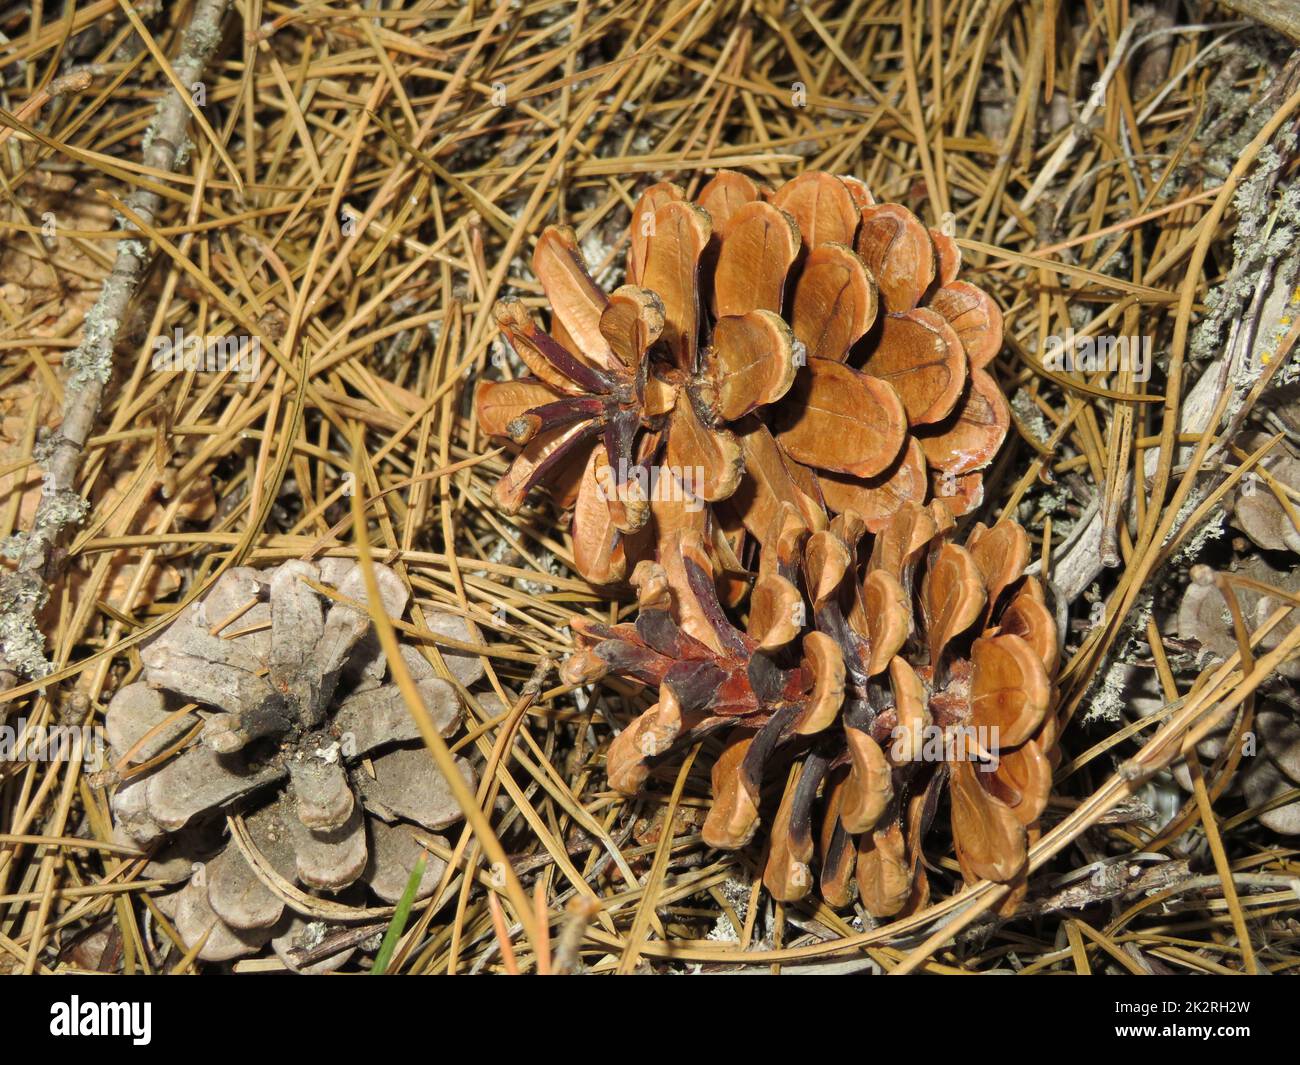 fallen pine cones without natural dry pine nuts firewood Stock Photo